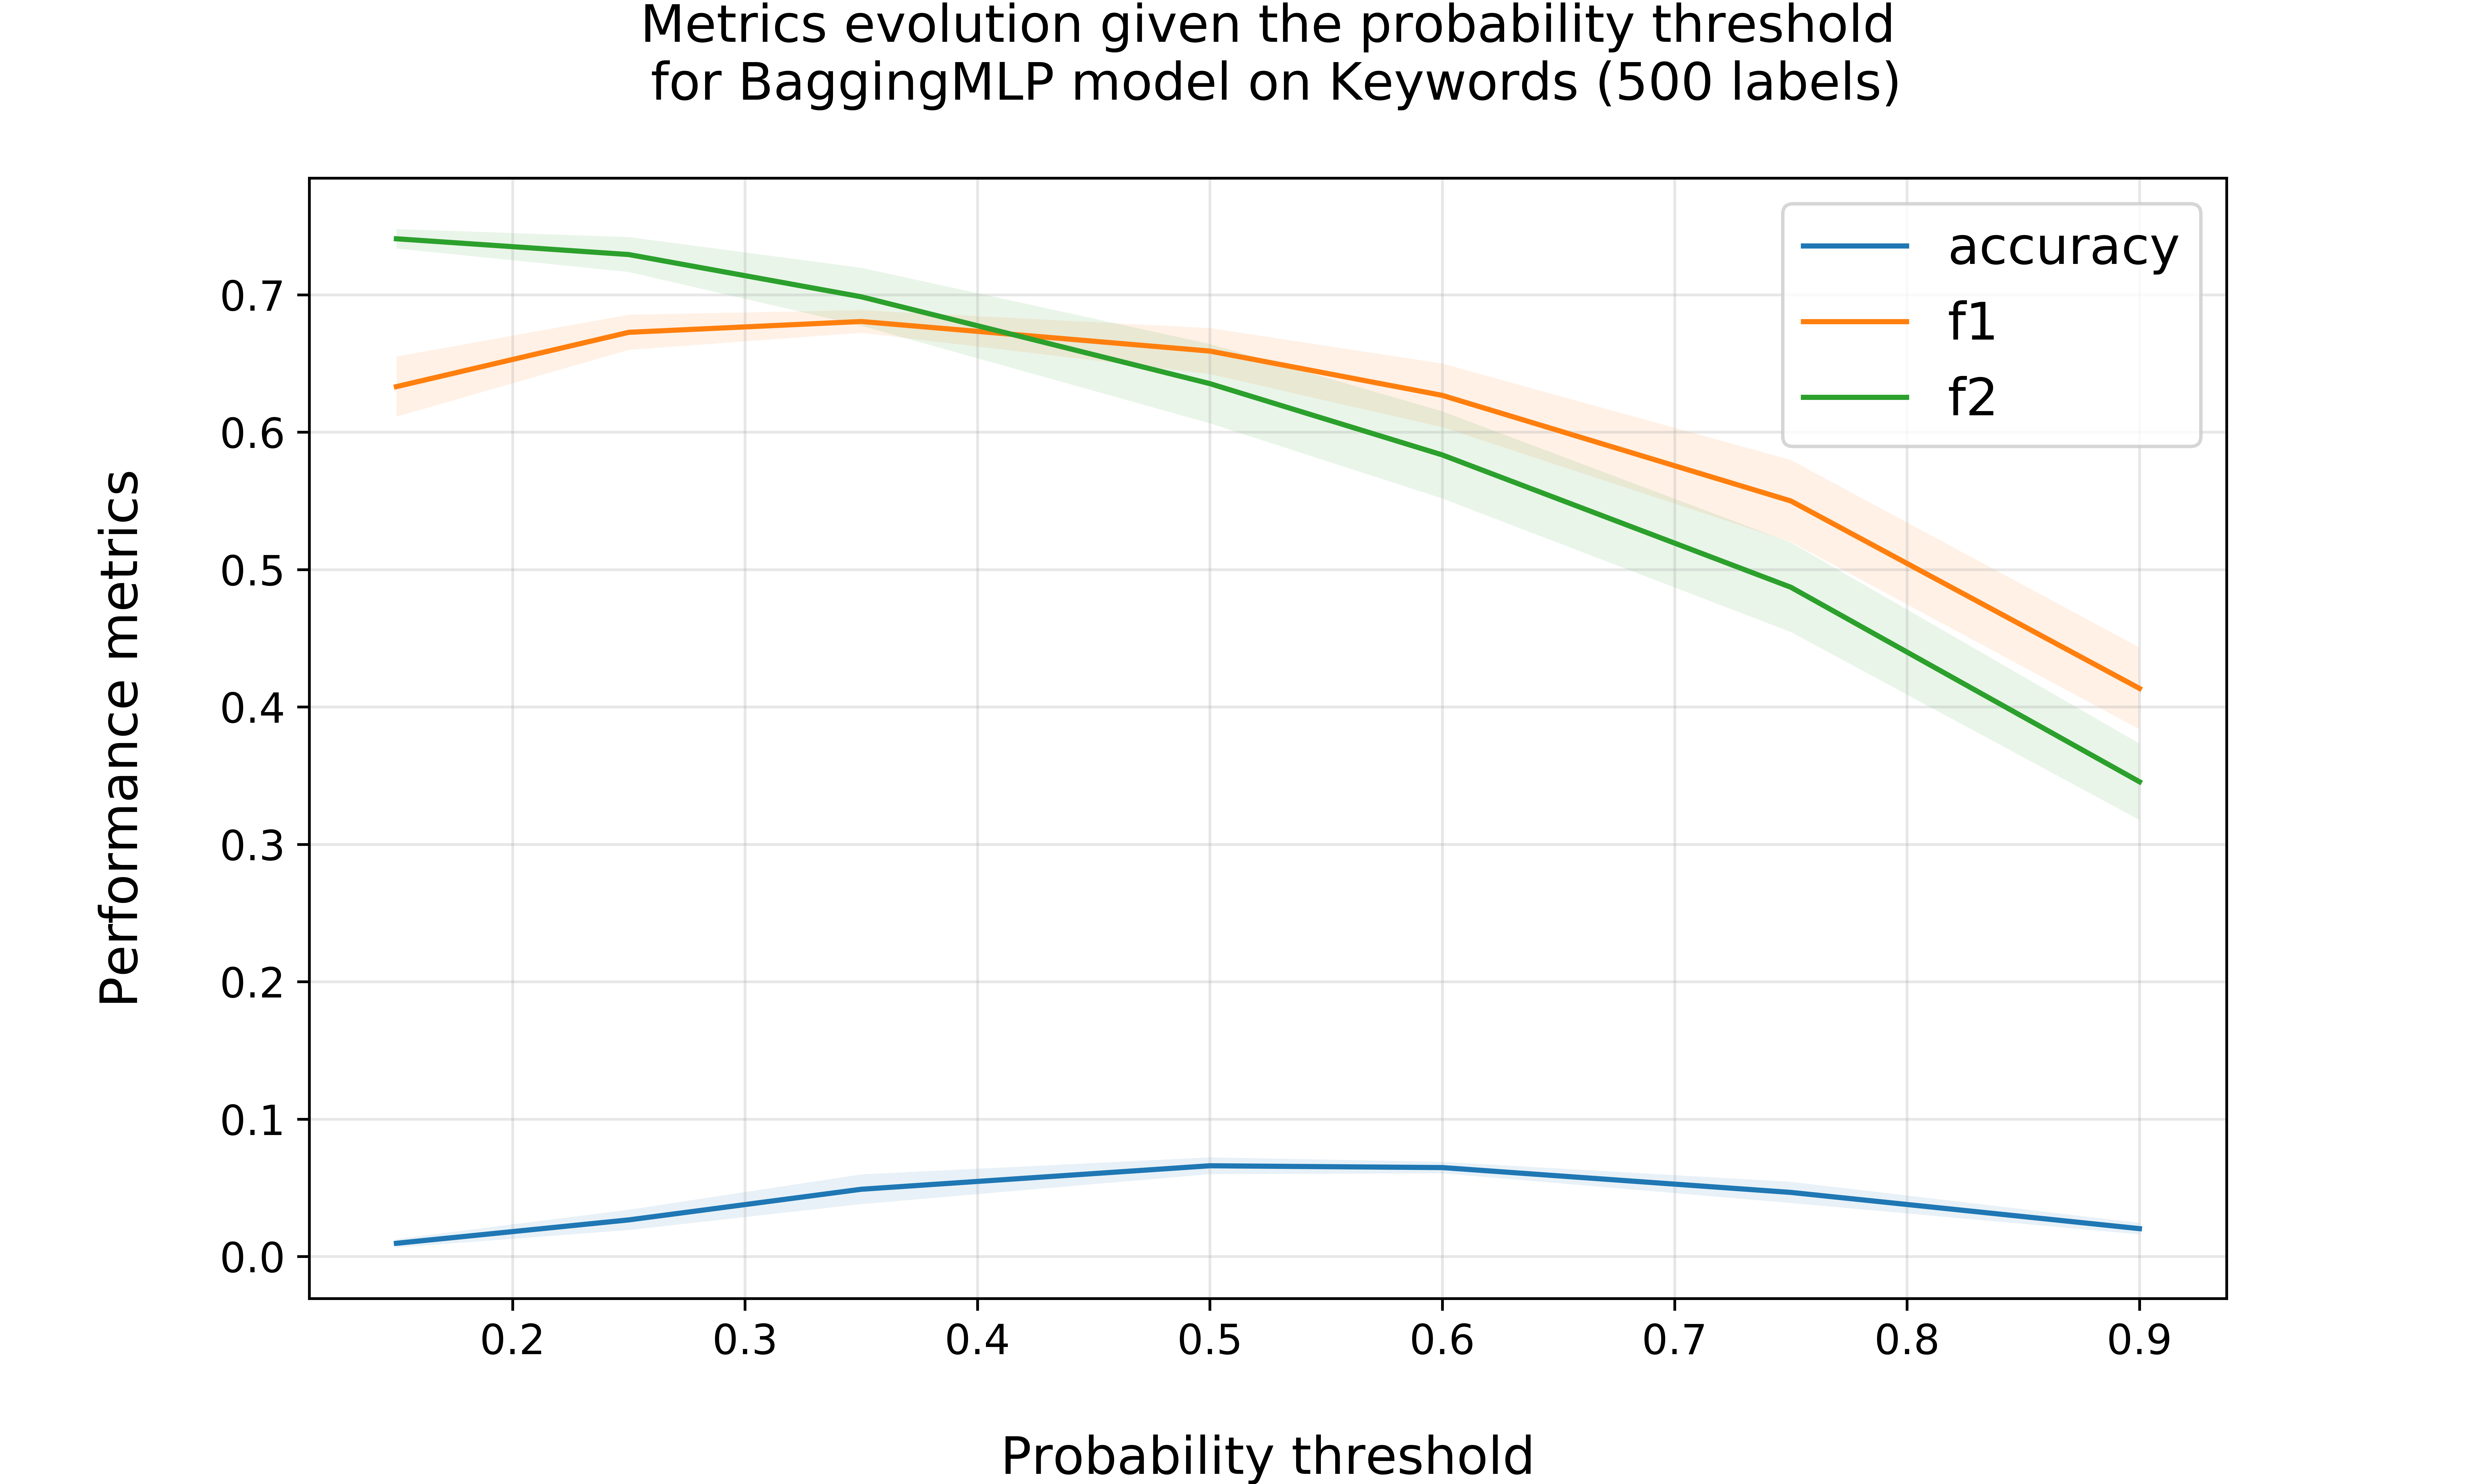 Tuning the probability threshold for 500 labels model 